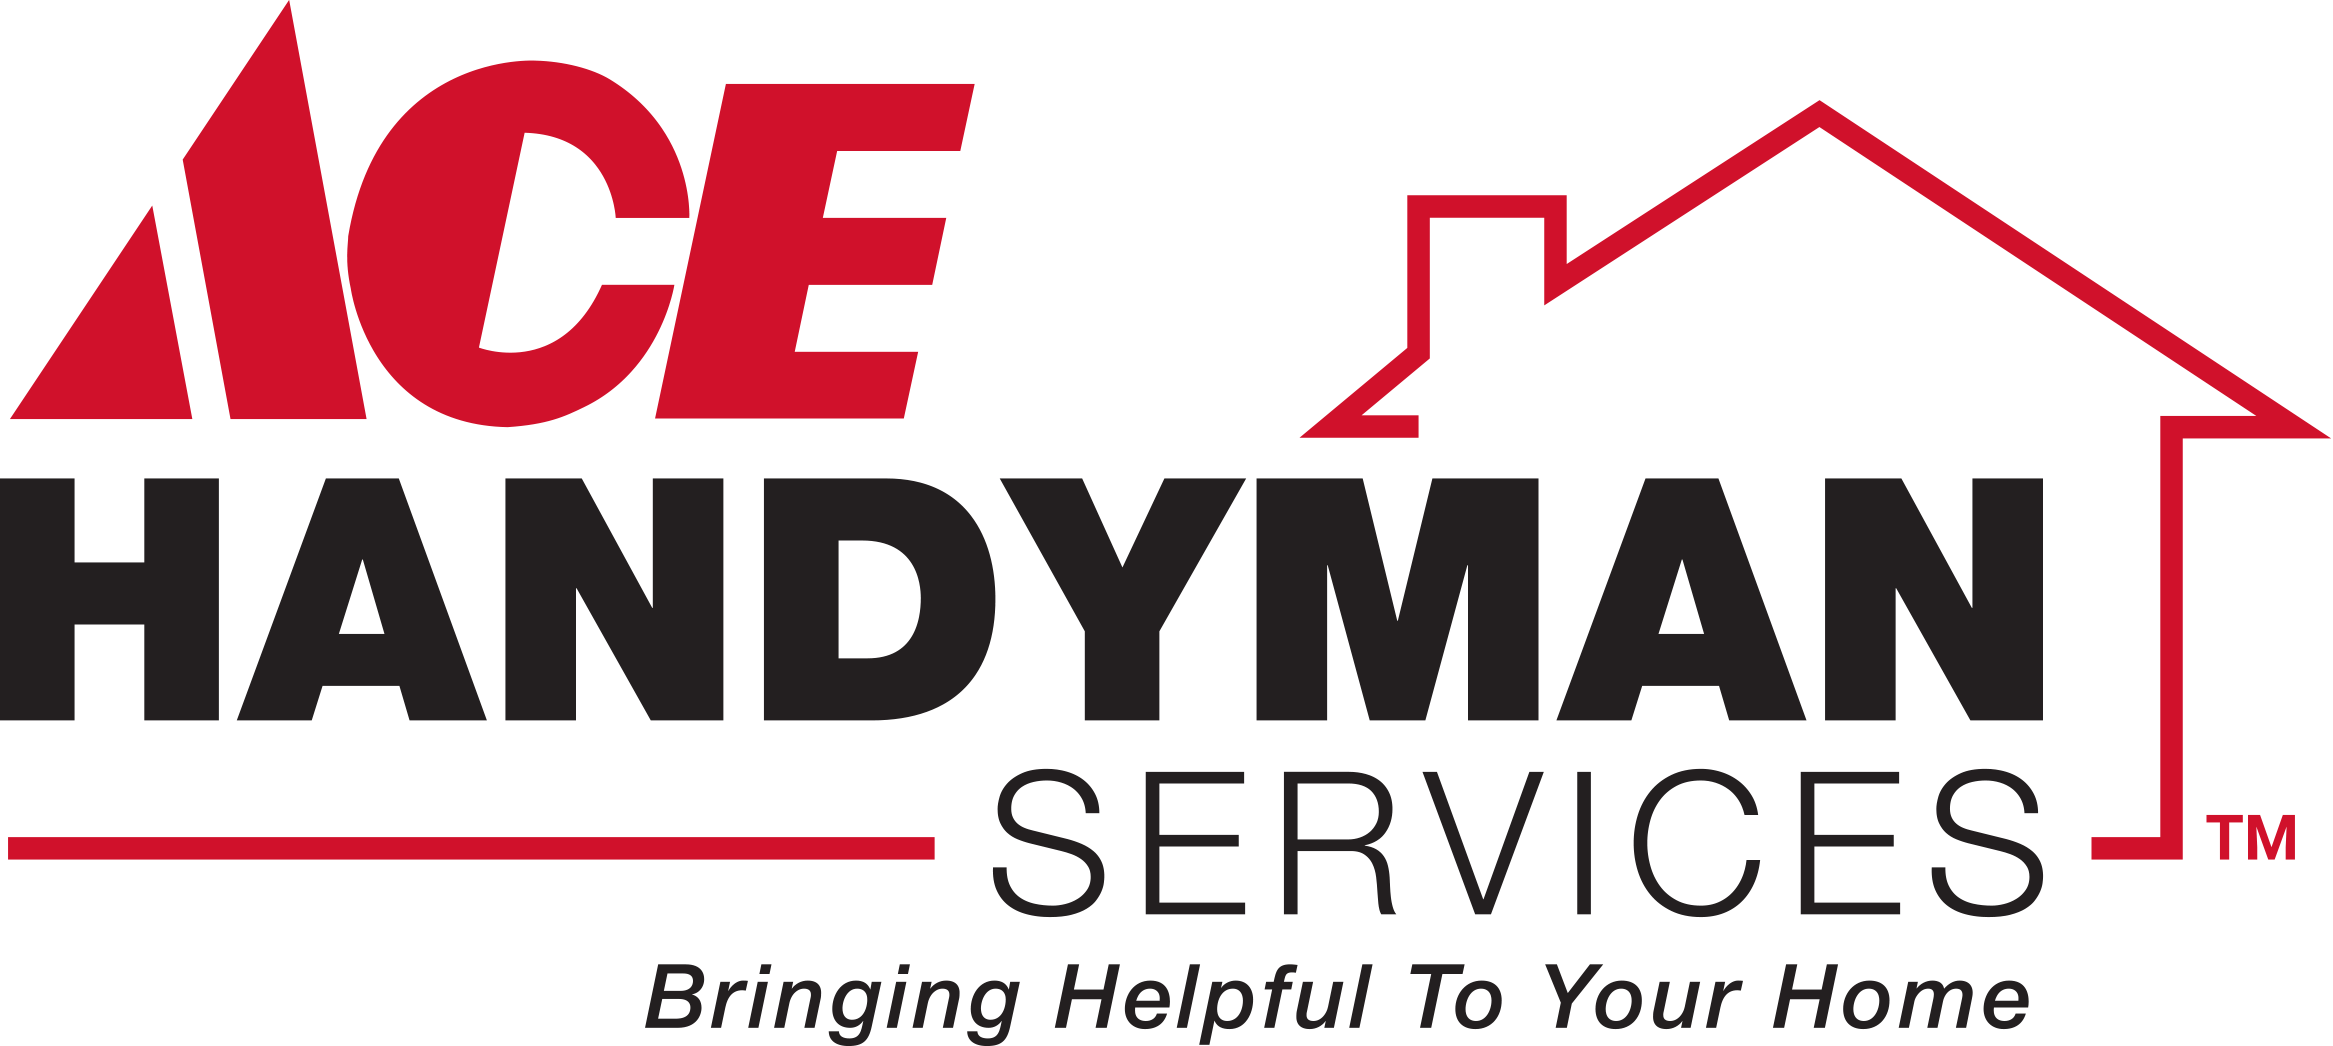 Ace Handyman Services Coppell Logo